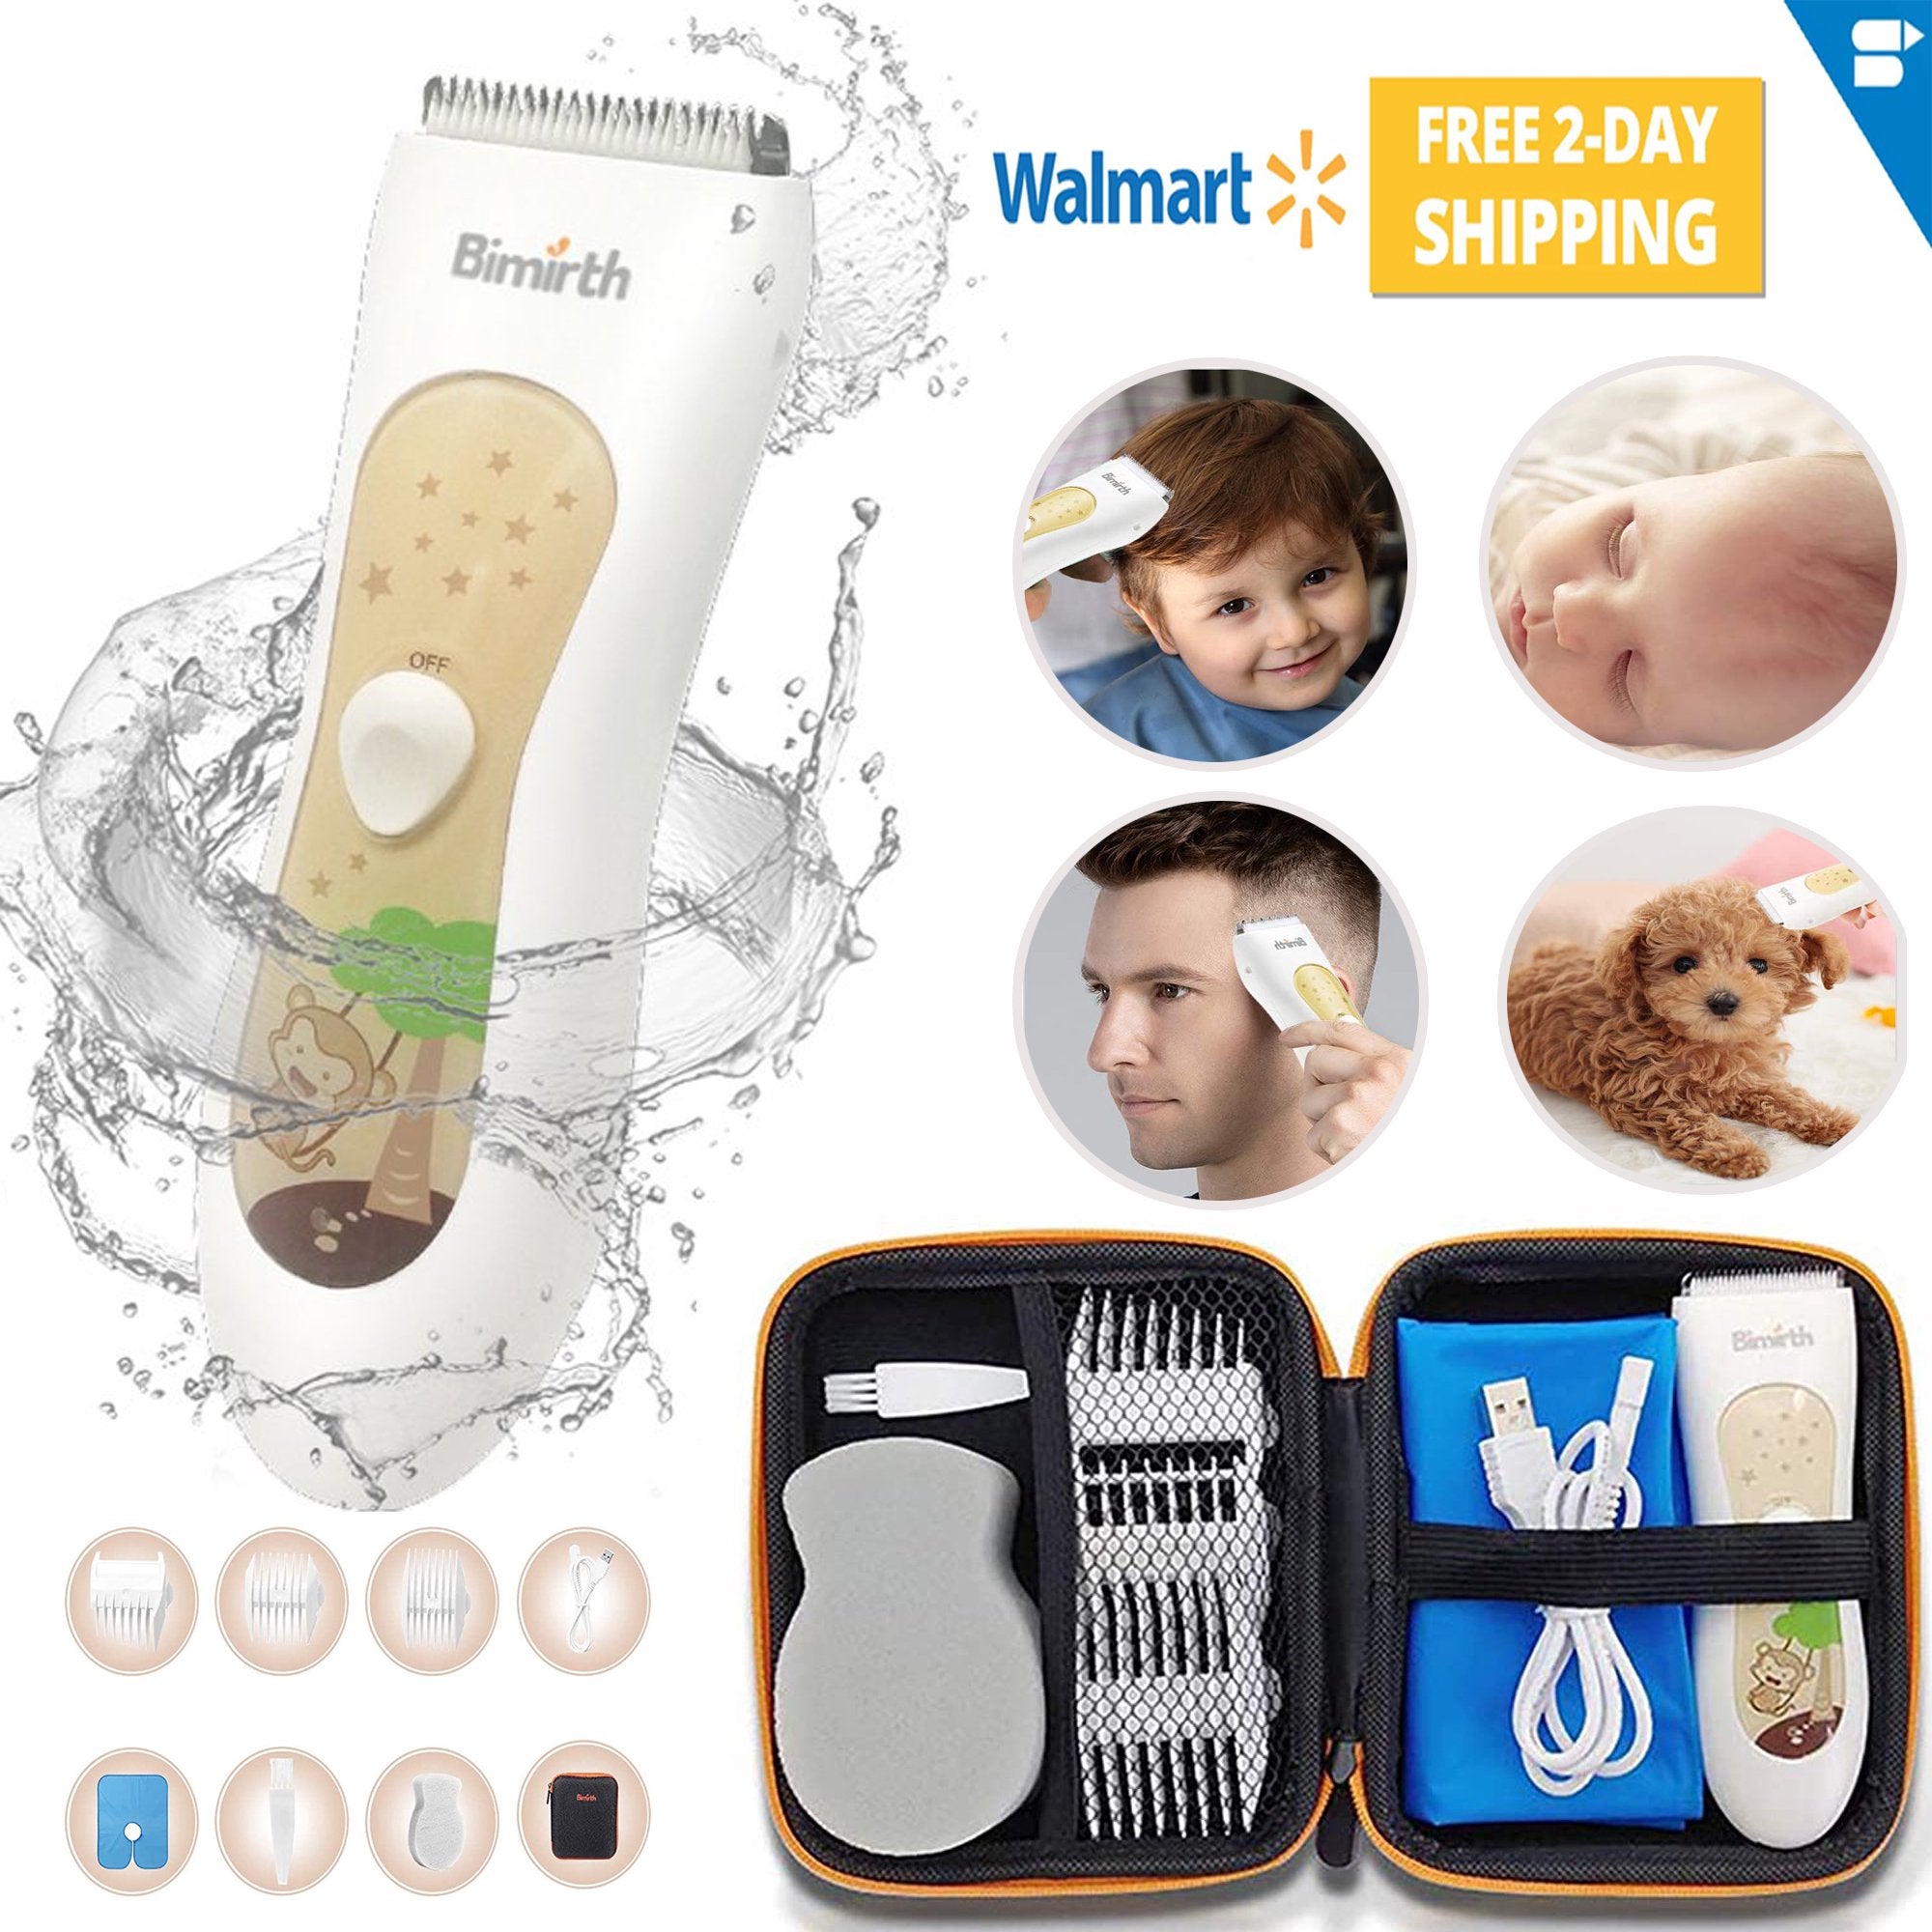 Kids Hair Clipper Electric Baby Hair Clipper Kits Waterproof Quiet Hair Trimmer Shaver for Babies Kids Toddler Boy Haircut Trimmer